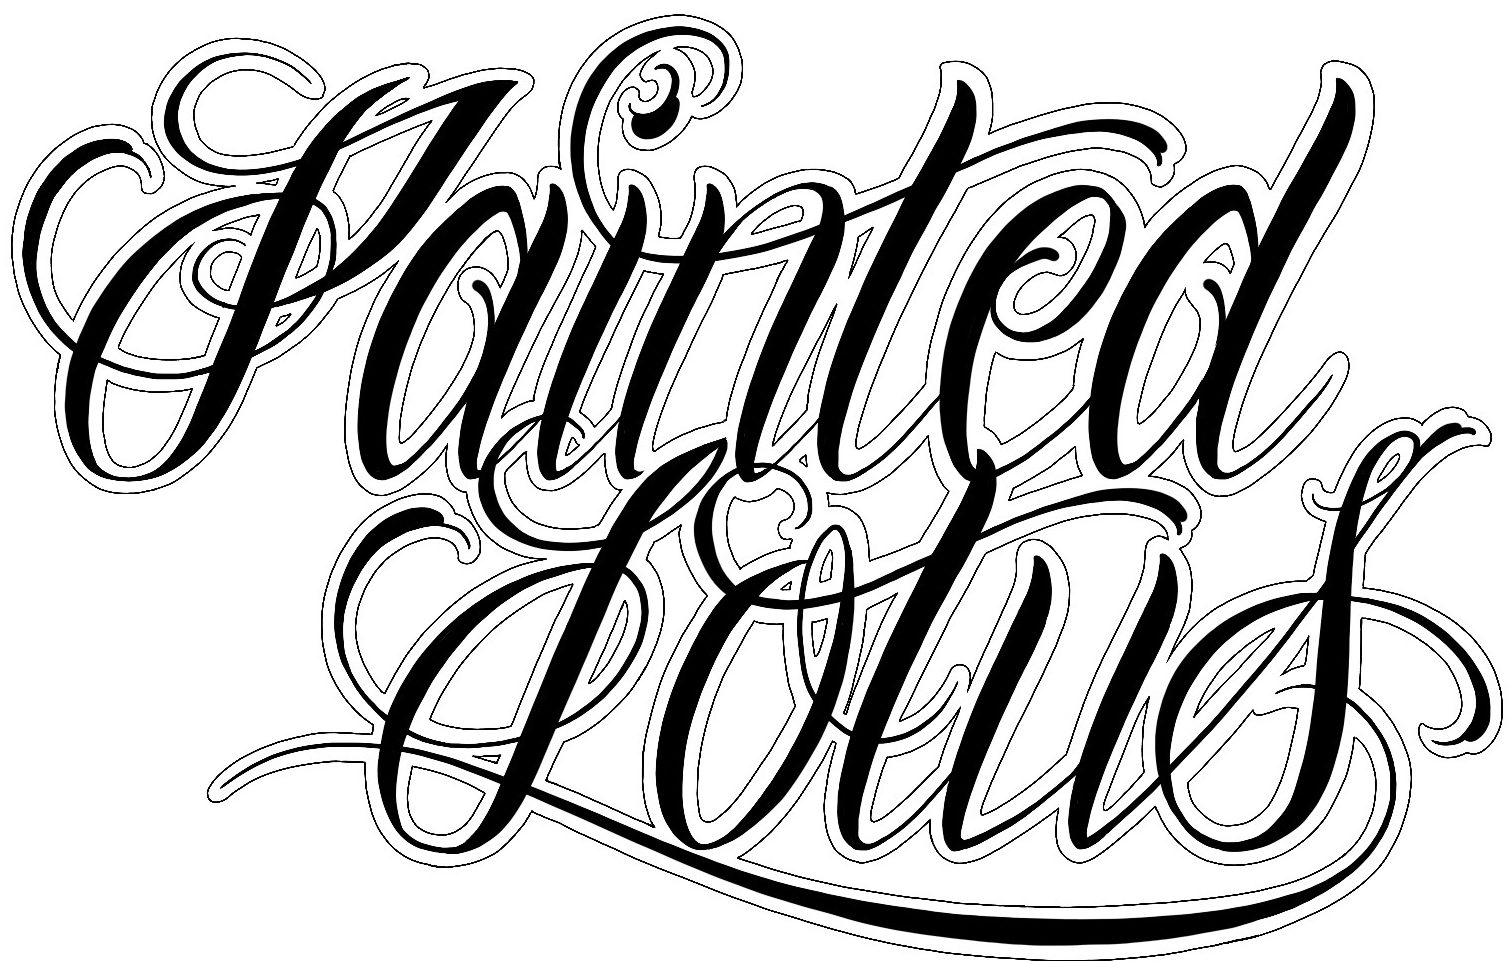 Painted Lotus Tattoo - award winning & experienced custom tattooing since 2009 |  Voted Victoria's Best Tattoo Shop! Victoria, BC